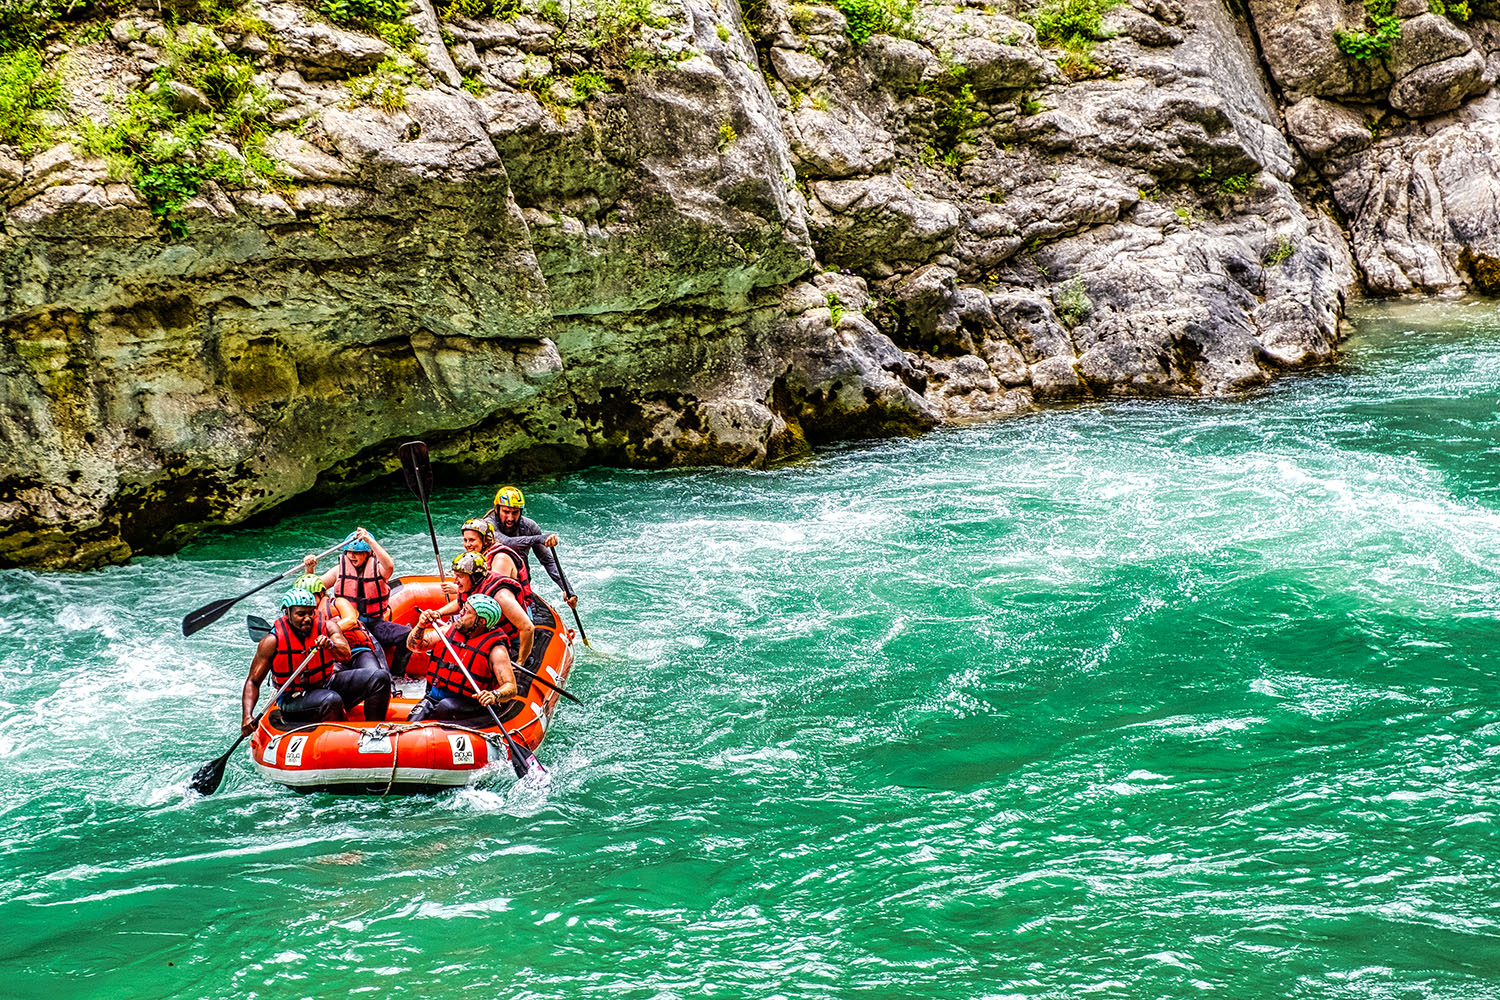 These people are obviously having a great time on the Verdon!